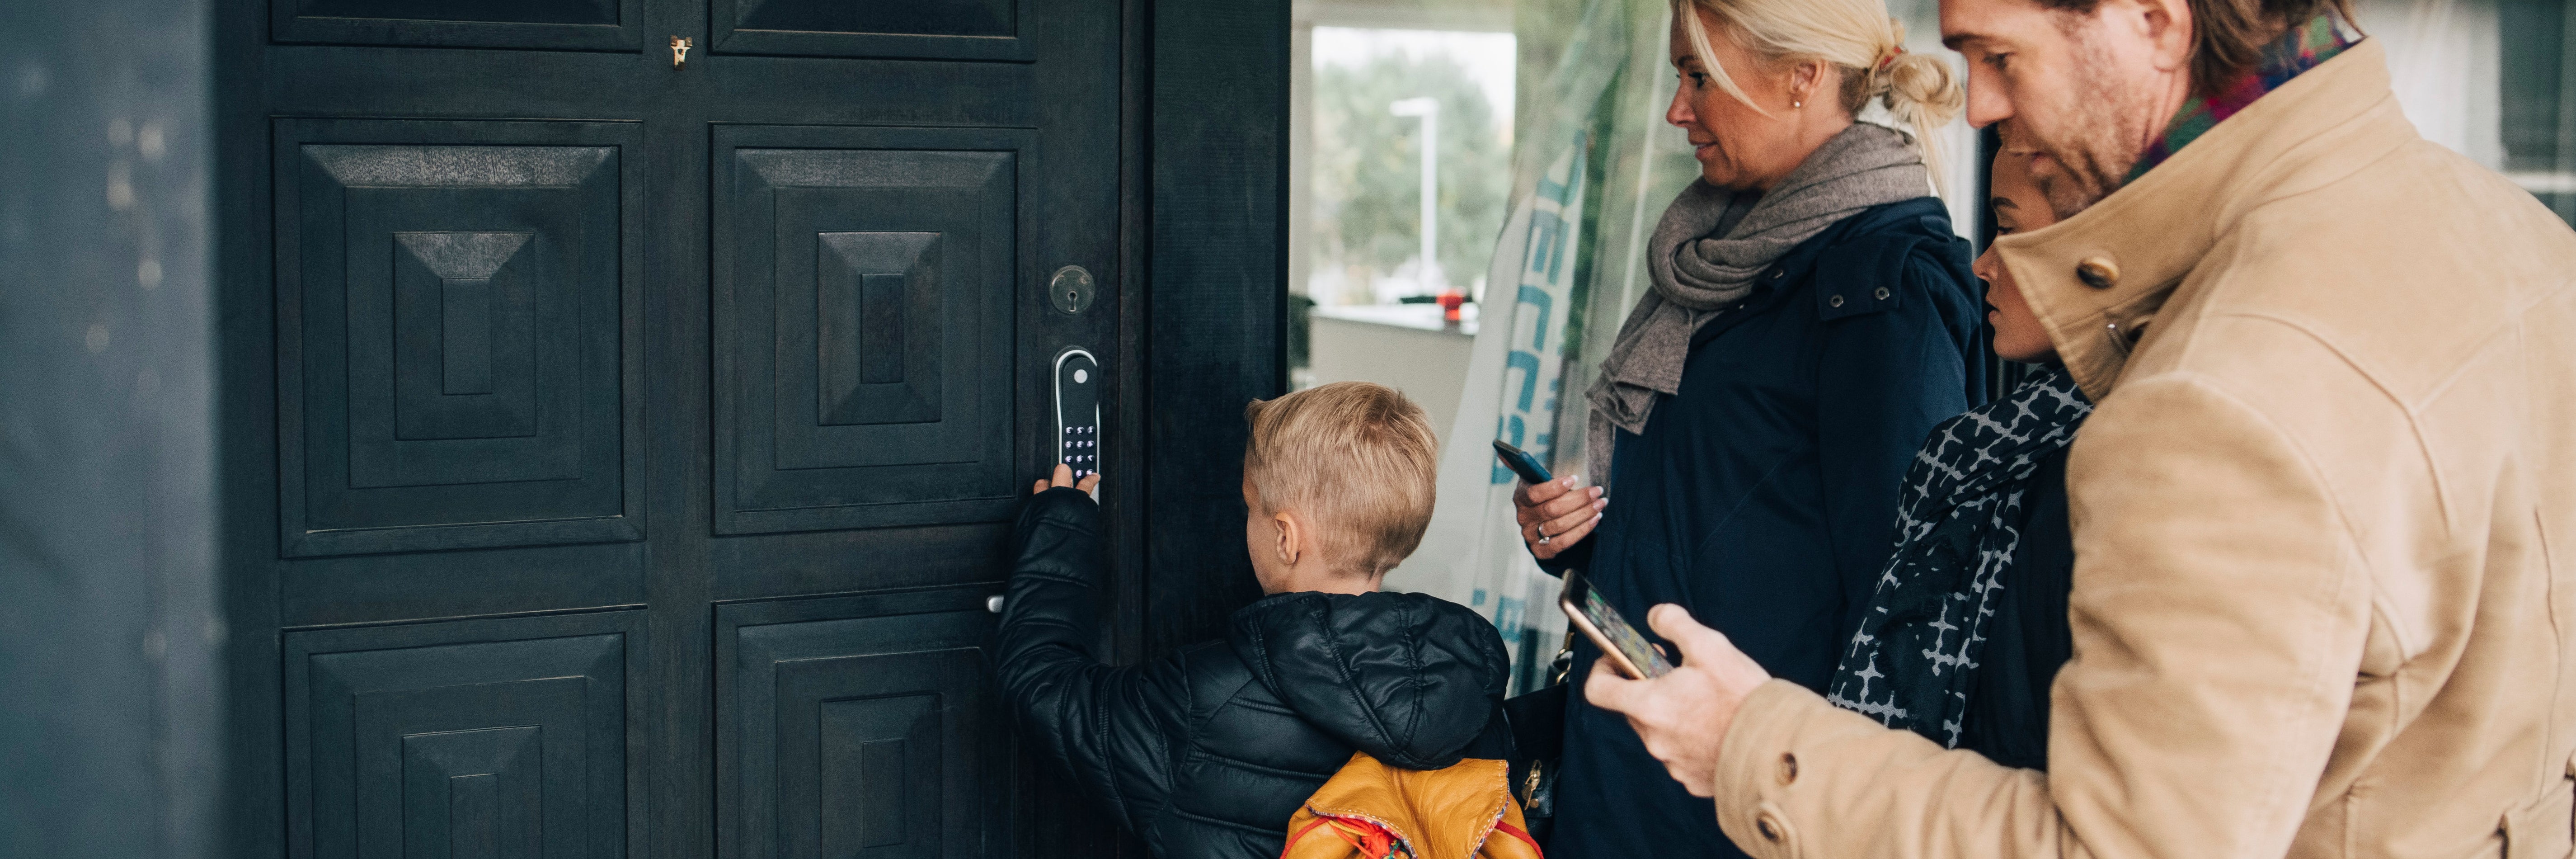 Family using smart lock at front door outside of home